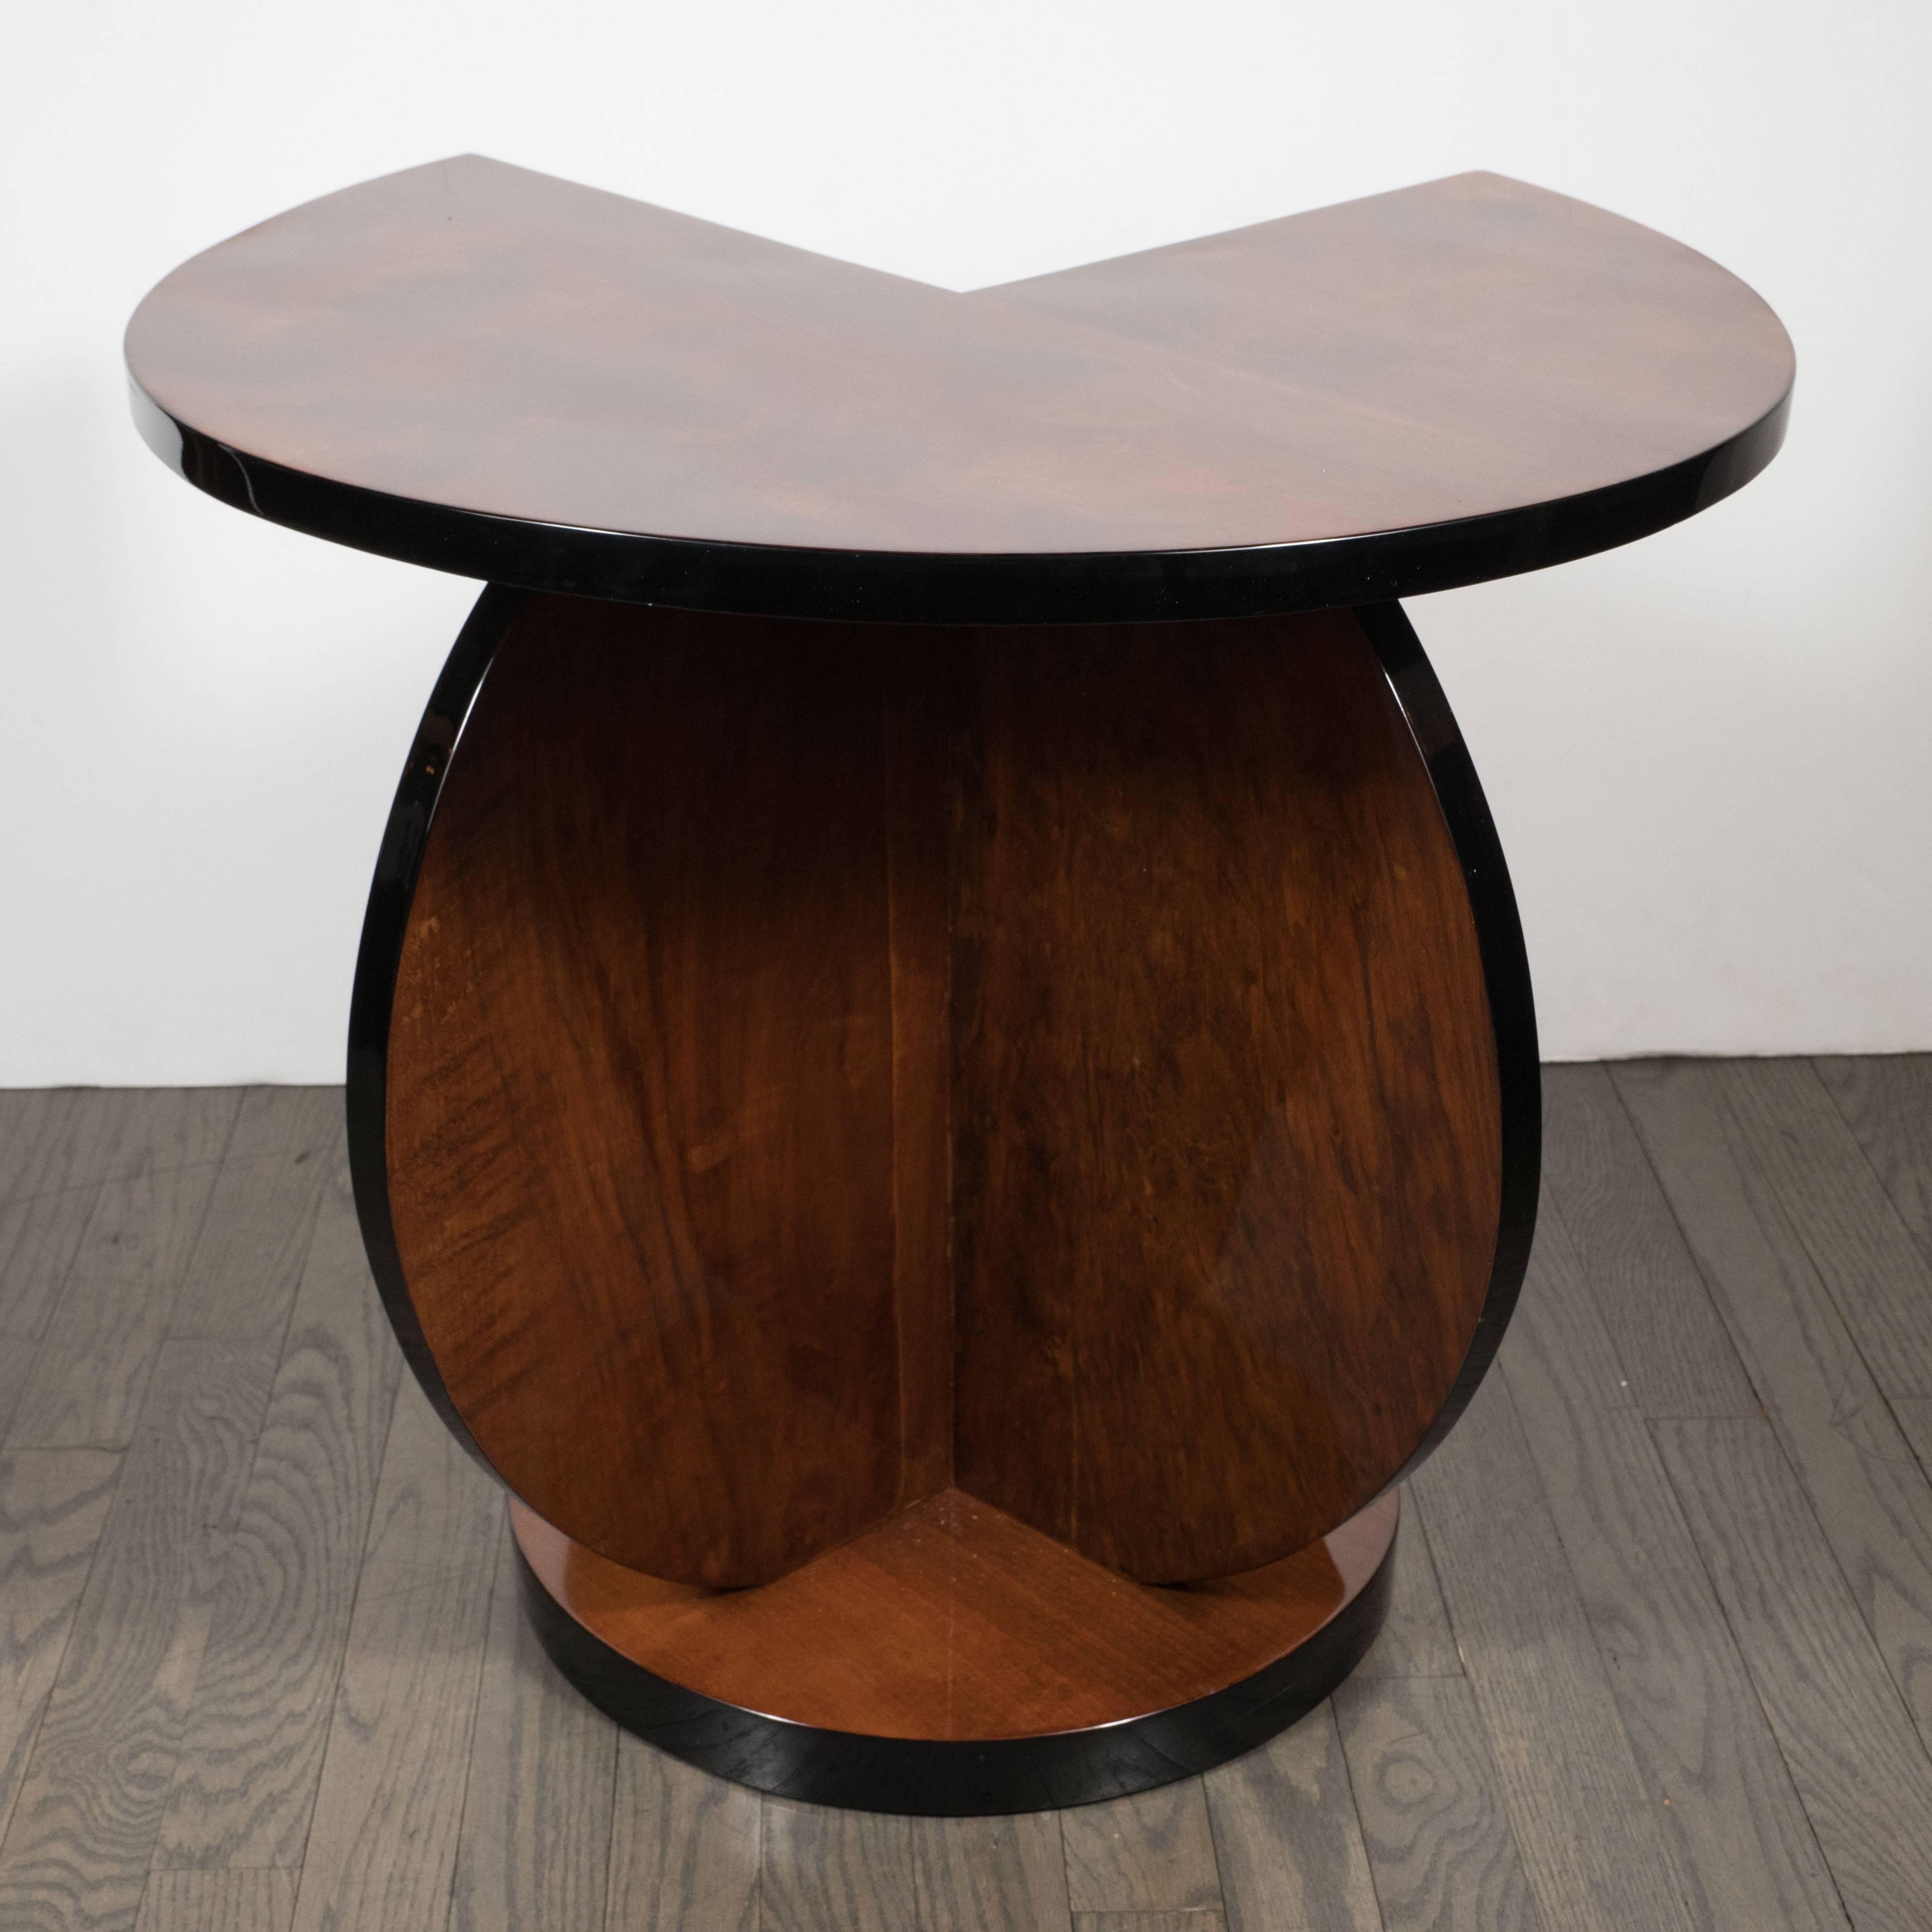 Mid-20th Century French Art Deco Cubist Side Table in Bookmatched Burled Walnut and Black Lacquer